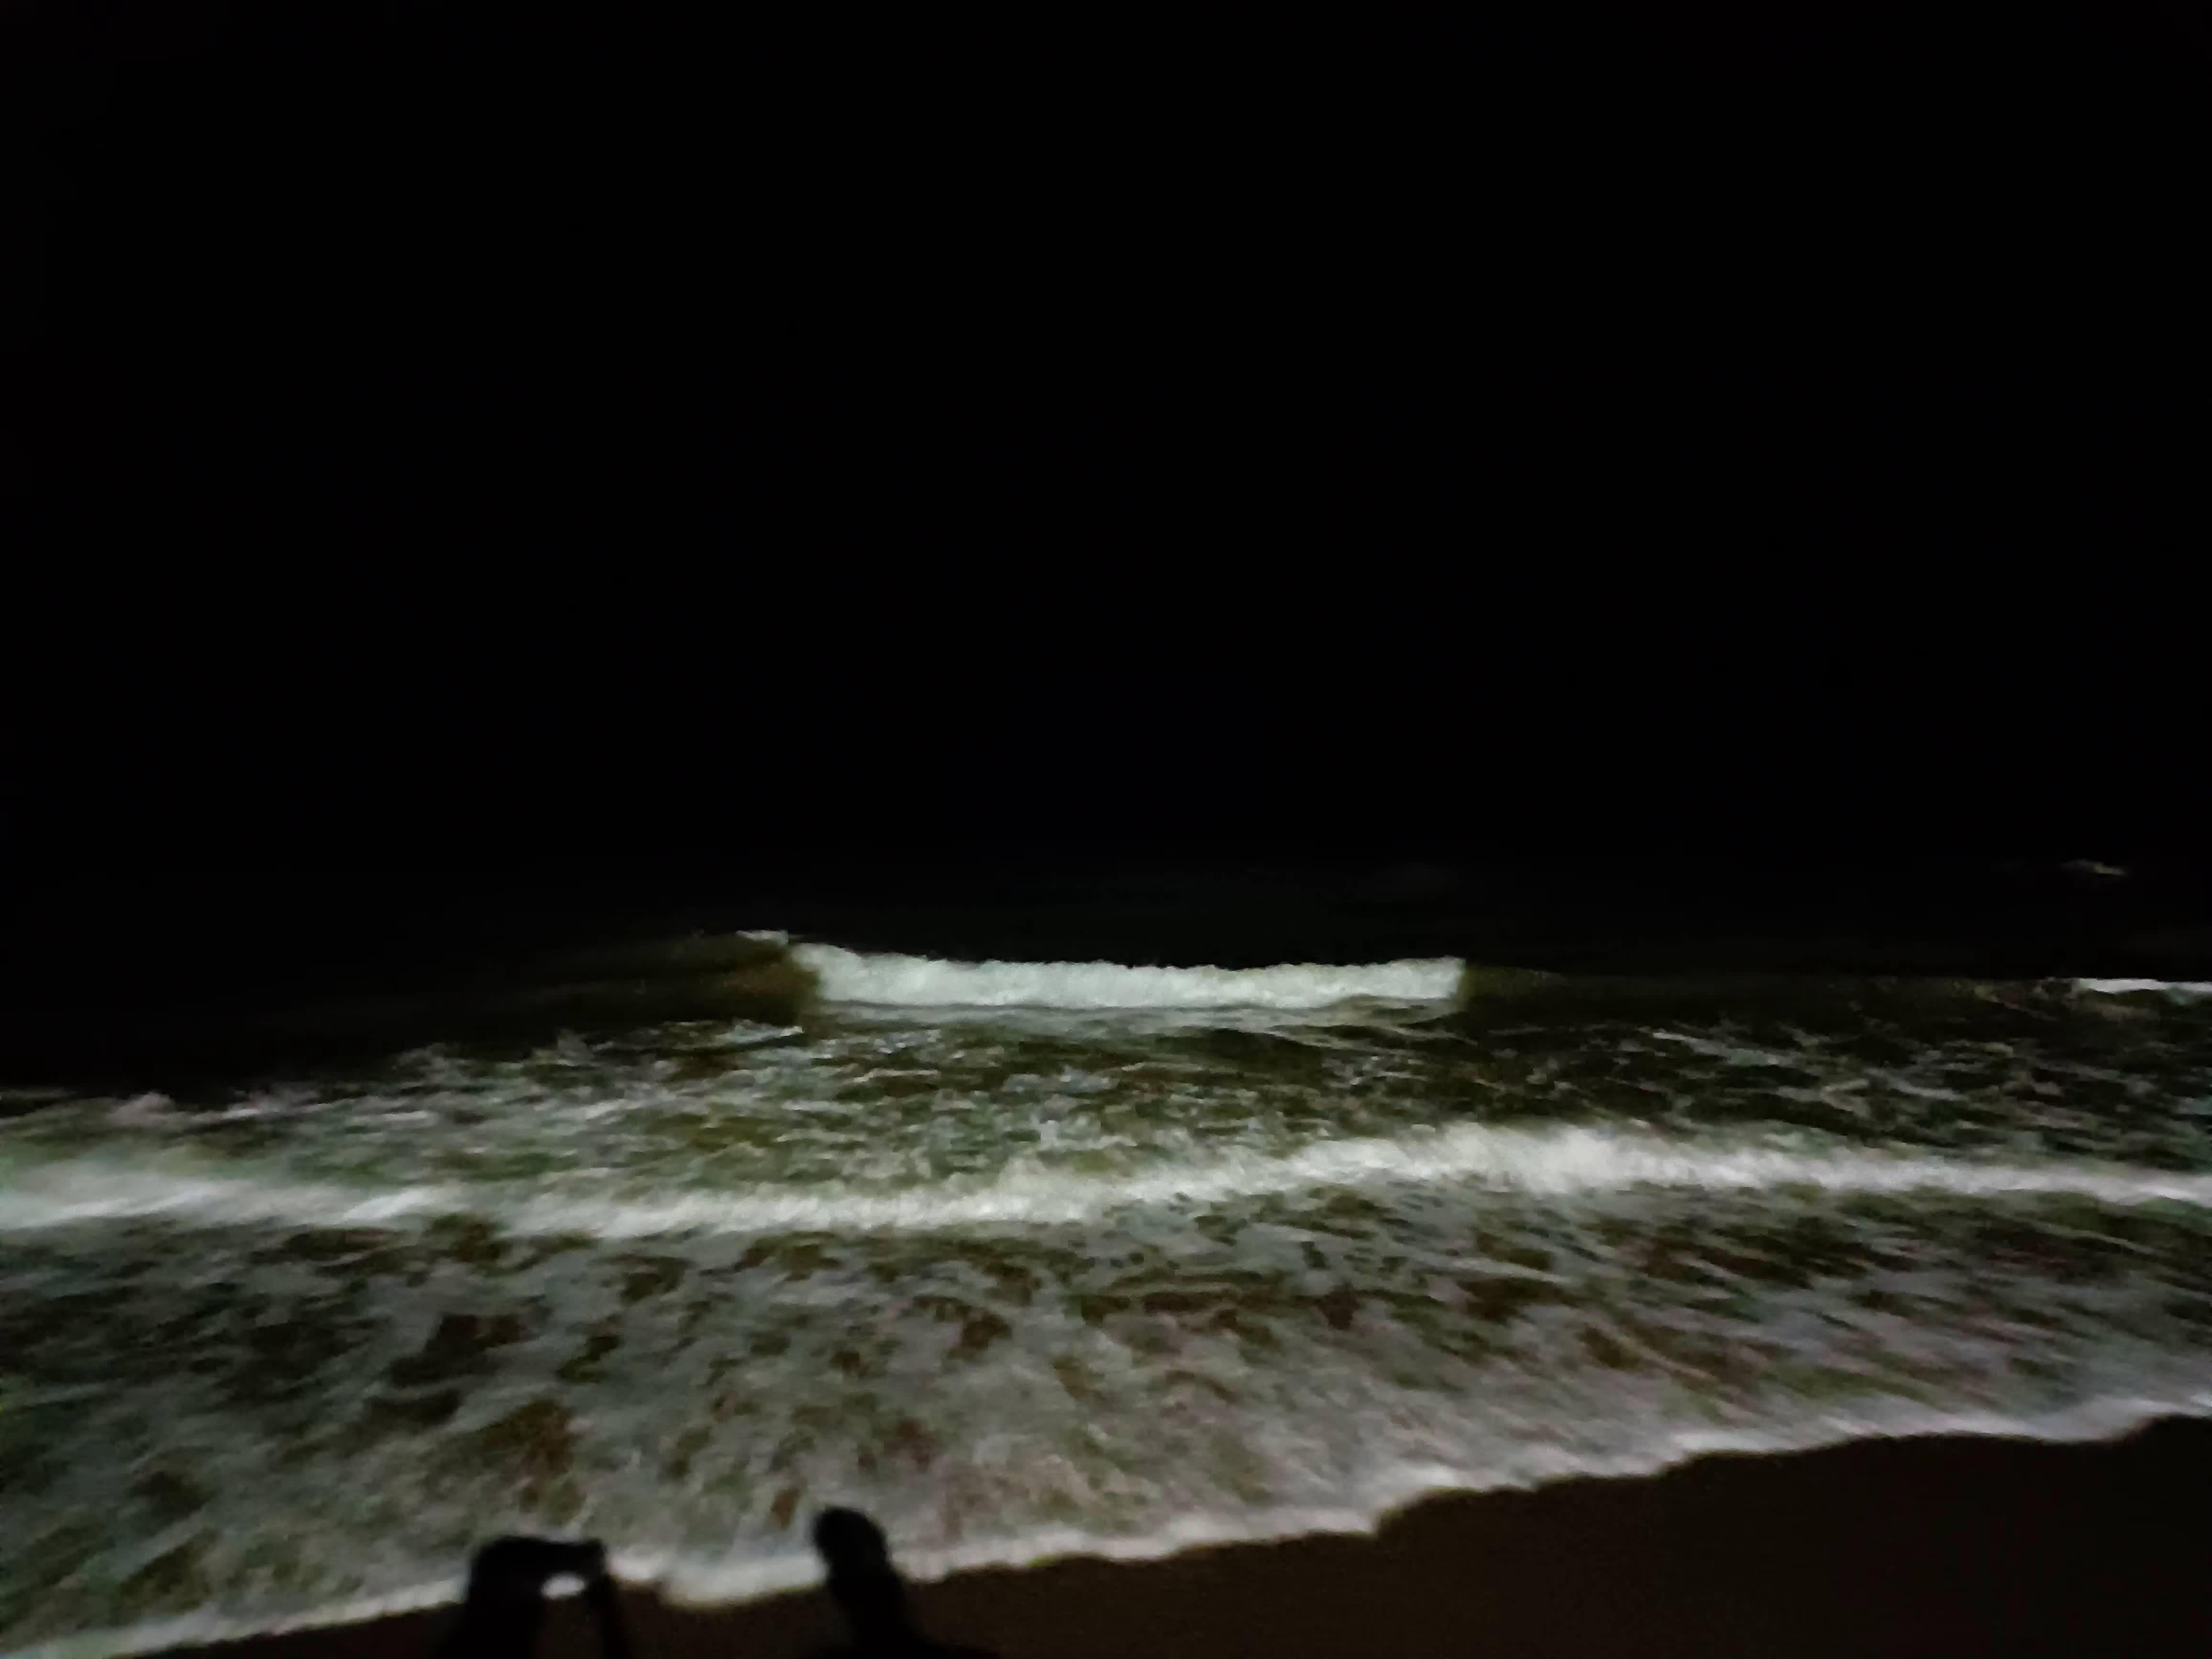 Photograph of Sea in the night